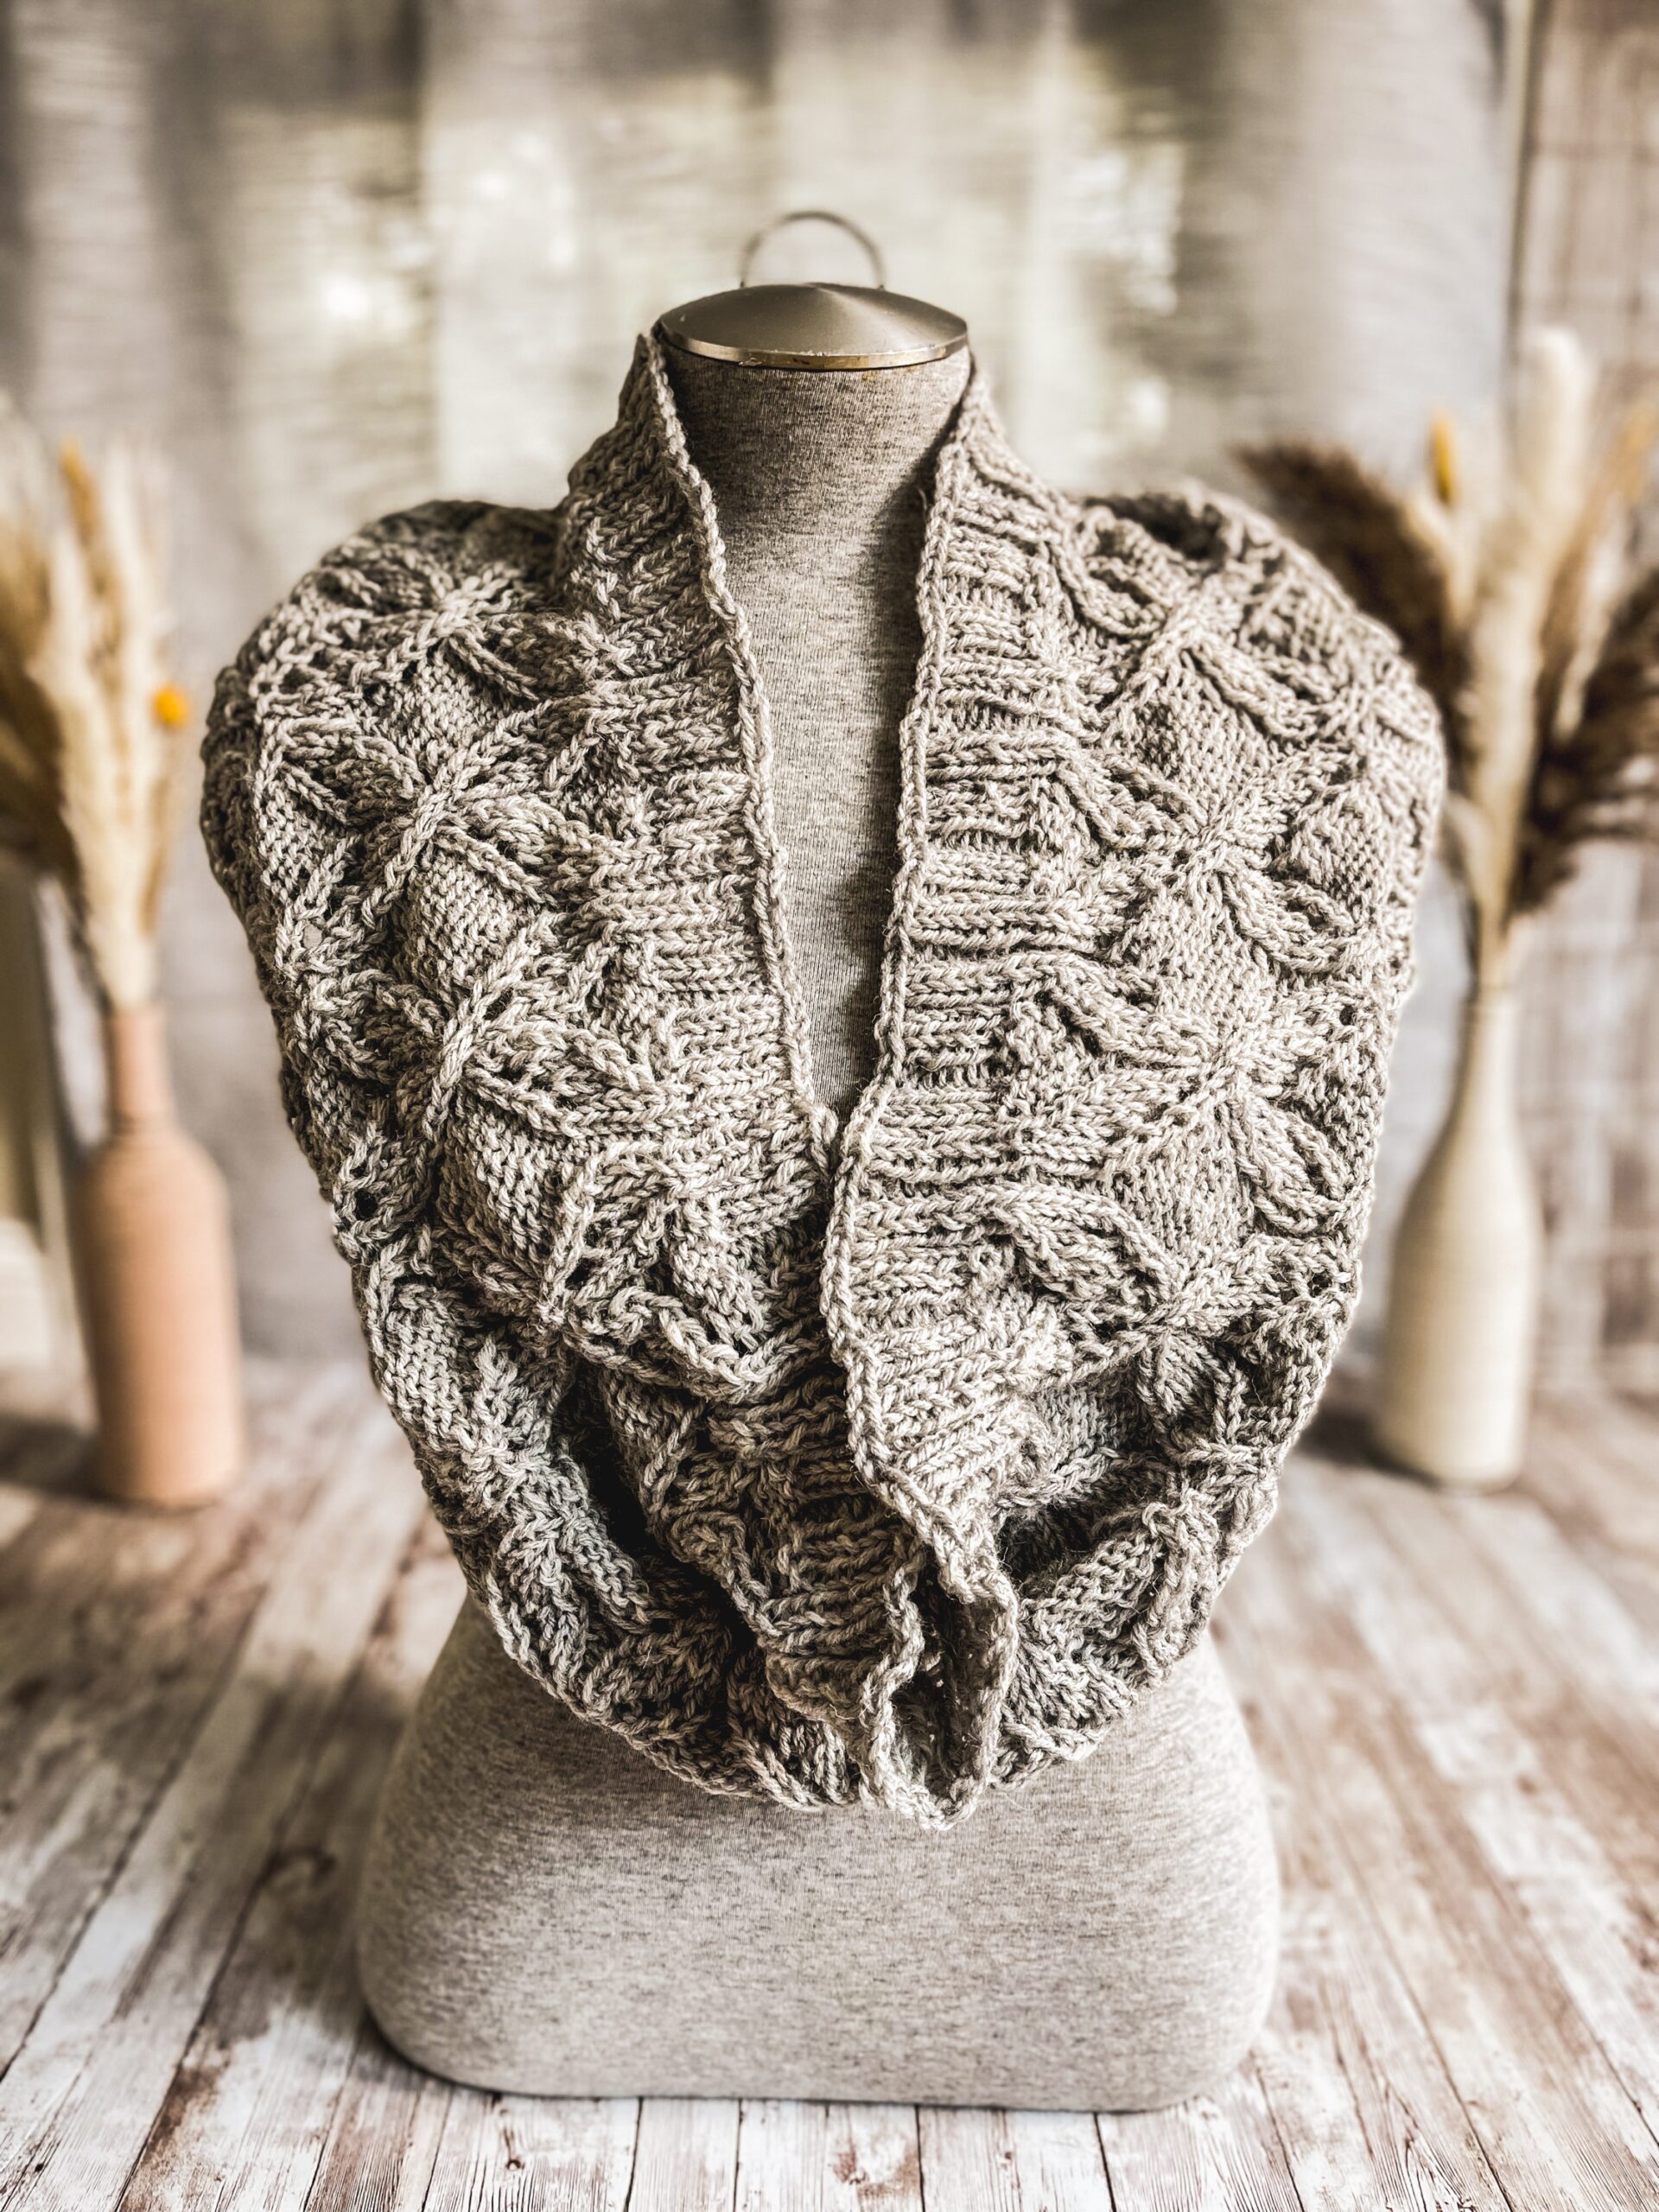 A gray mannequin torso displays a gray infinity scarf, hand-knit in a cables and lace pattern